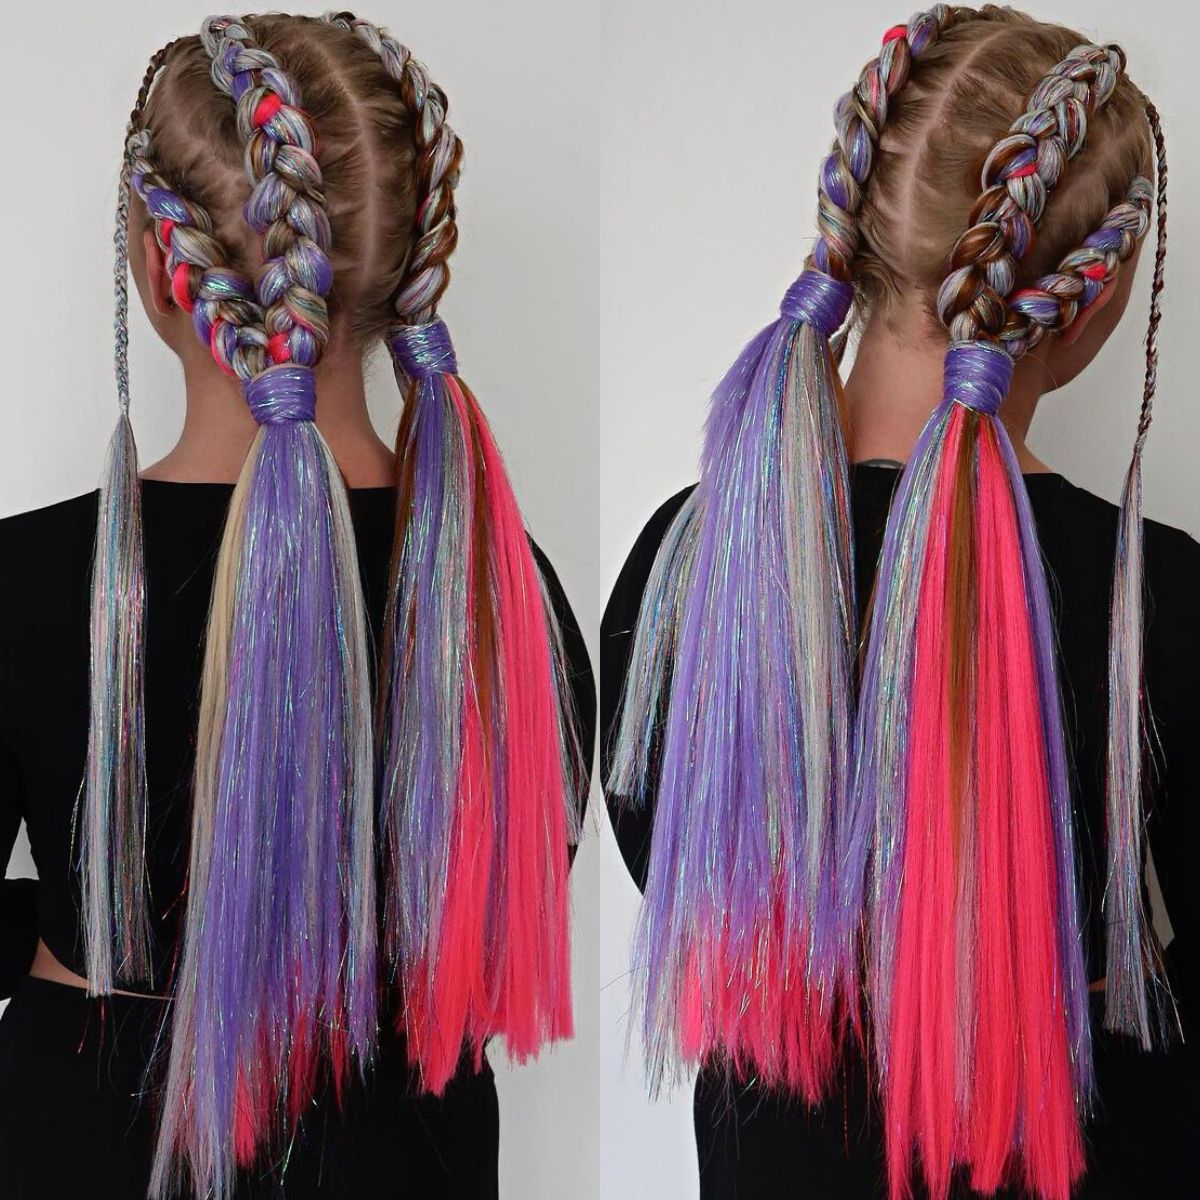 Rave Very Long Braided Low Pigtails with Purple and Pink Hair Tinsels